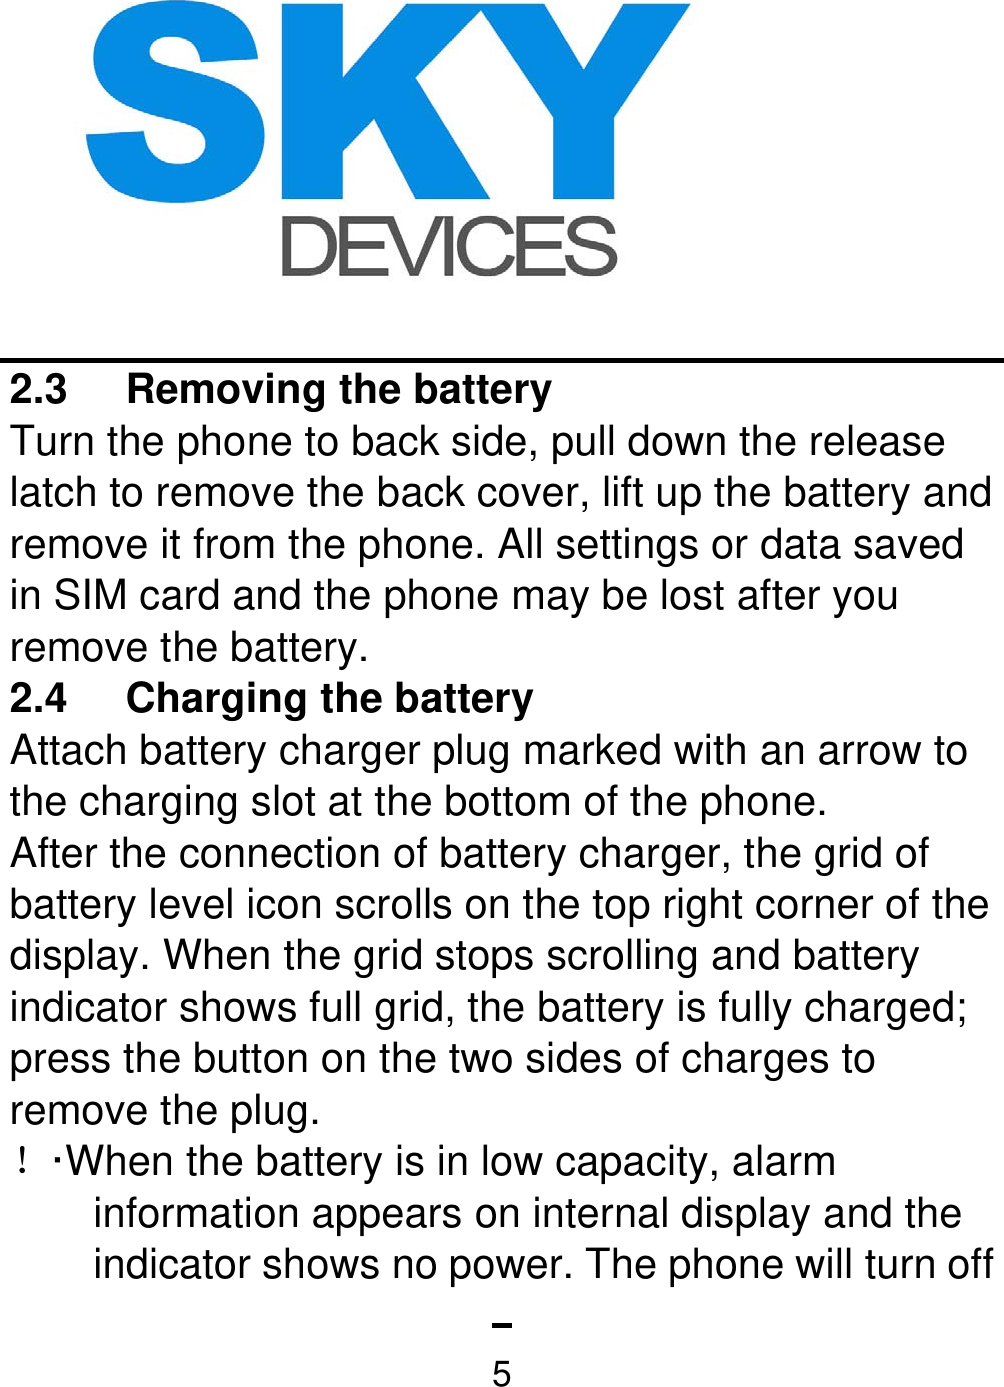   52.3 Removing the battery  Turn the phone to back side, pull down the release latch to remove the back cover, lift up the battery and remove it from the phone. All settings or data saved in SIM card and the phone may be lost after you remove the battery.   2.4  Charging the battery   Attach battery charger plug marked with an arrow to the charging slot at the bottom of the phone. After the connection of battery charger, the grid of battery level icon scrolls on the top right corner of the display. When the grid stops scrolling and battery indicator shows full grid, the battery is fully charged; press the button on the two sides of charges to remove the plug. ！·When the battery is in low capacity, alarm information appears on internal display and the indicator shows no power. The phone will turn off 